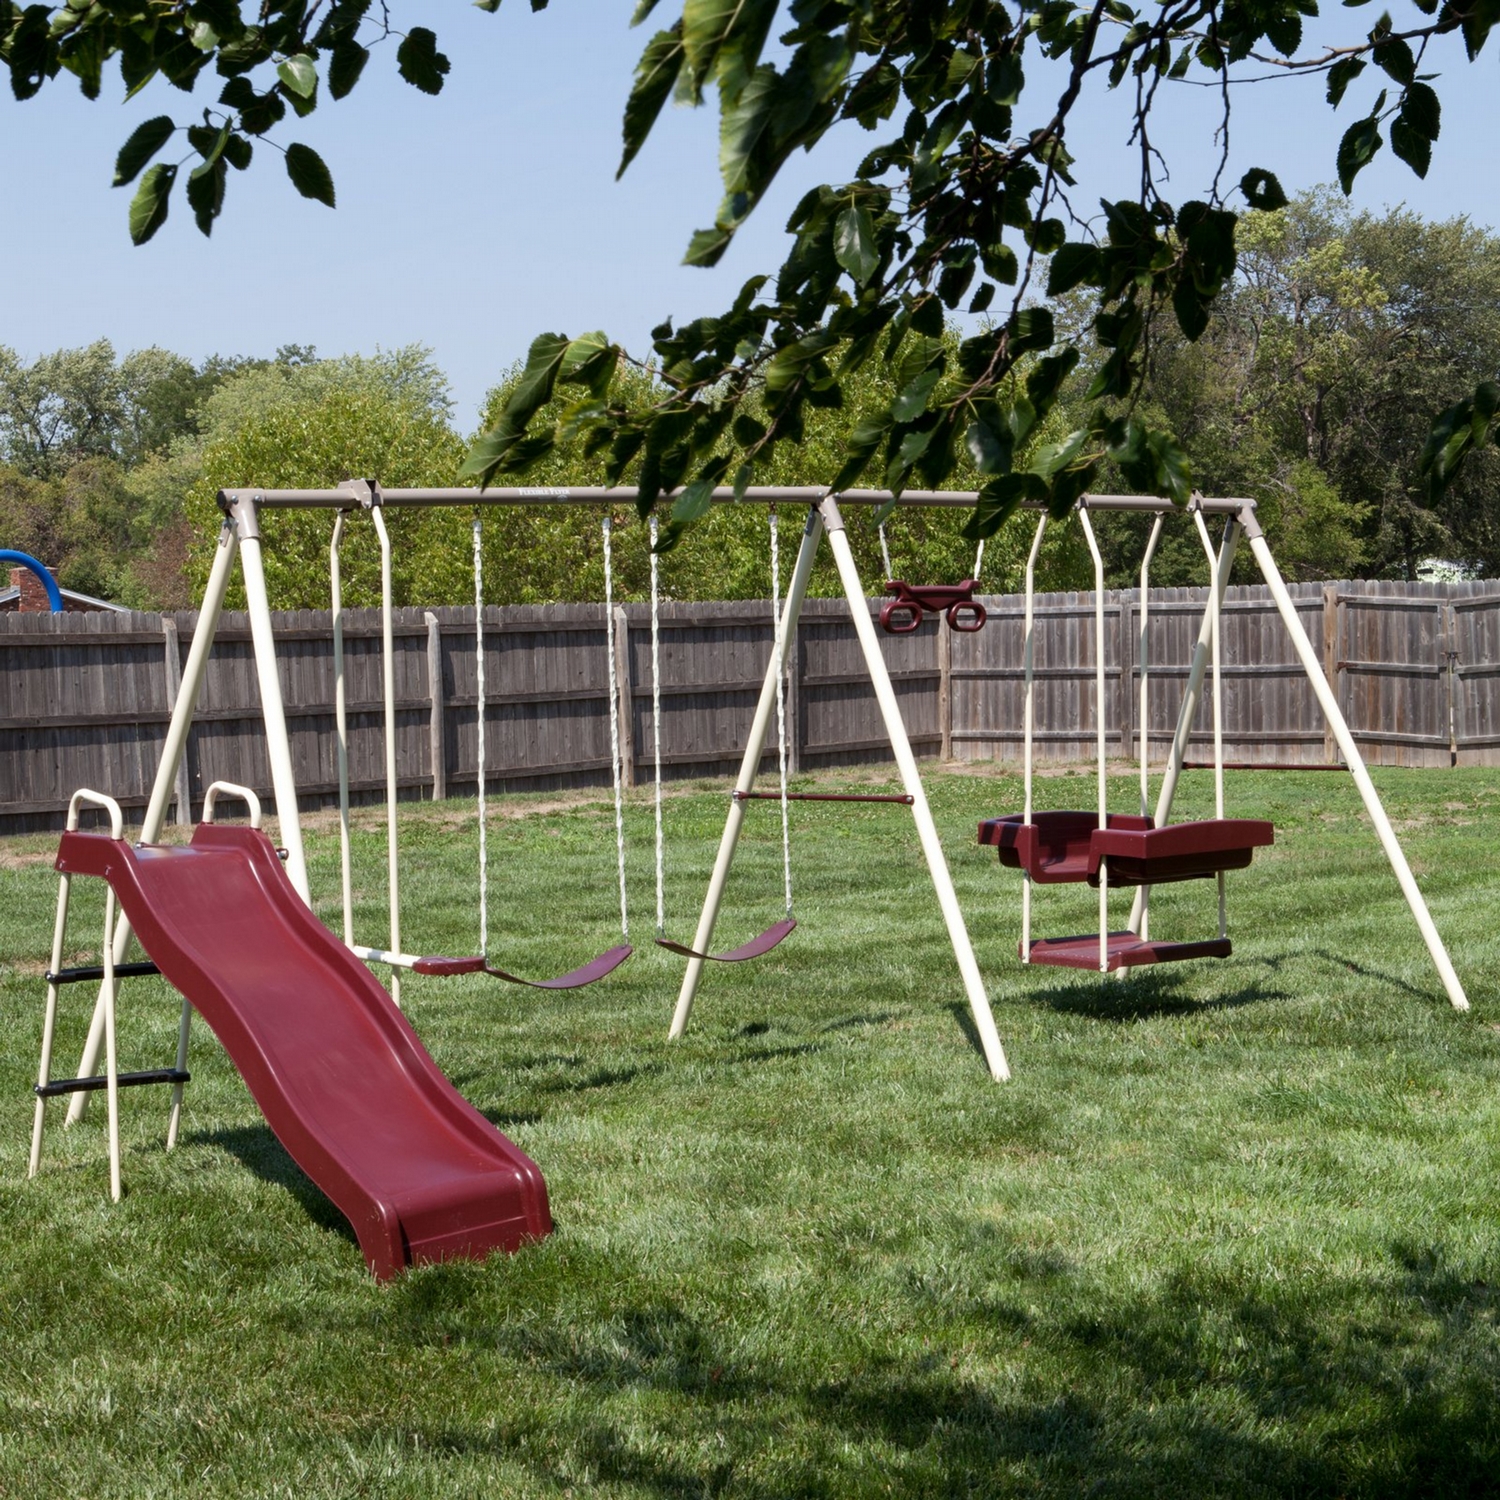 Flexible Flyer Play Park Swing Set | Shop Your Way: Online Shopping ...